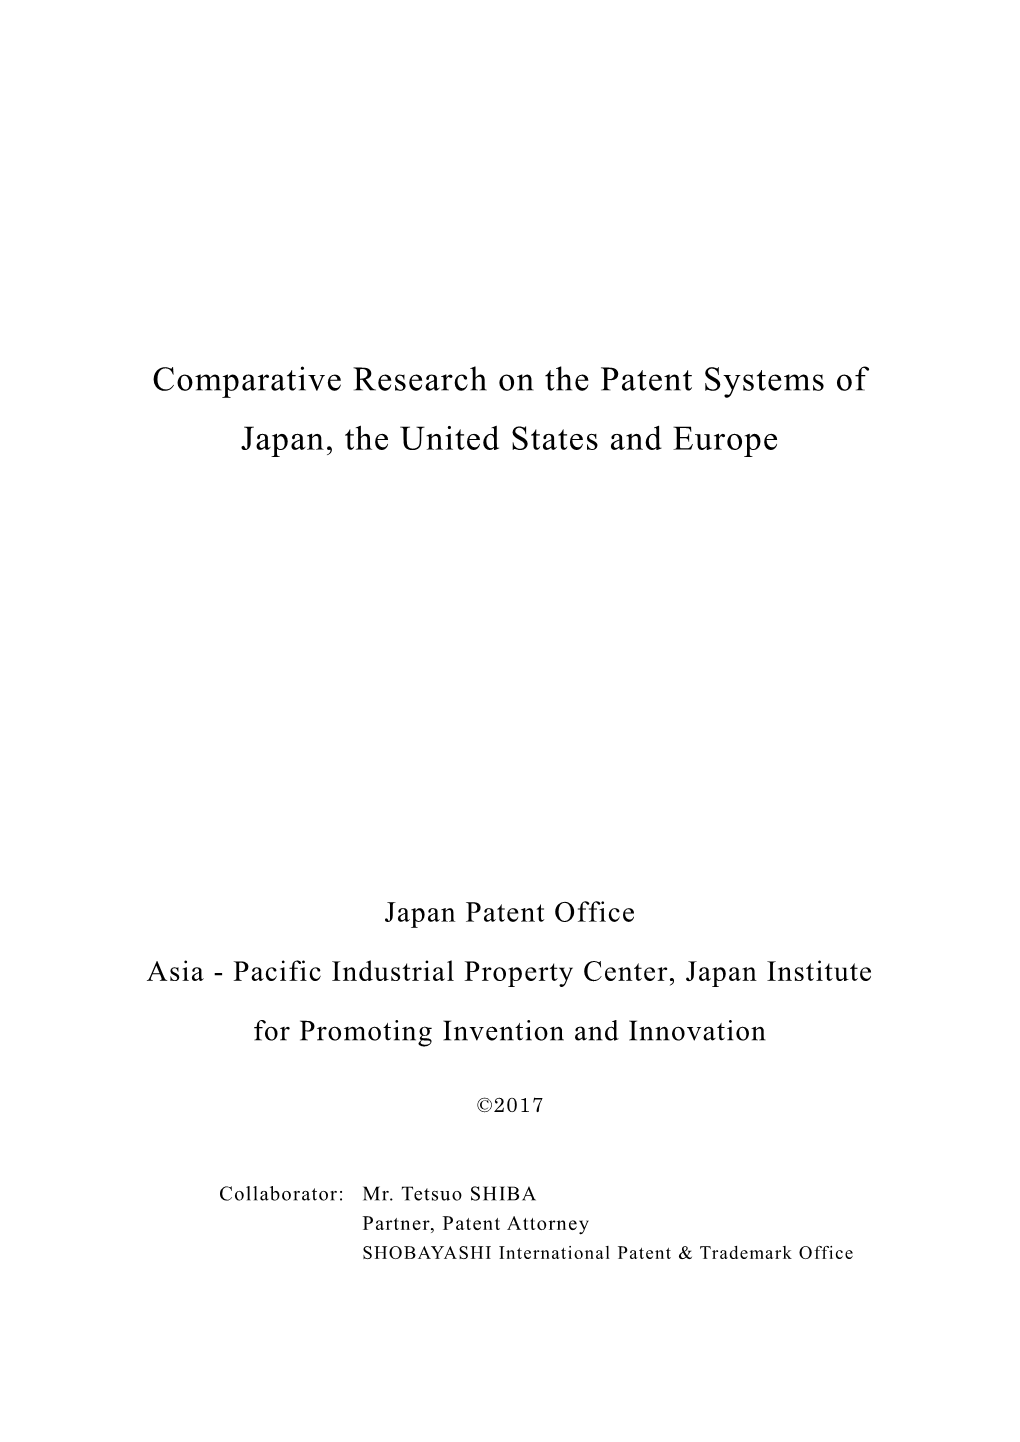 Comparative Research on the Patent Systems of Japan, the United States and Europe